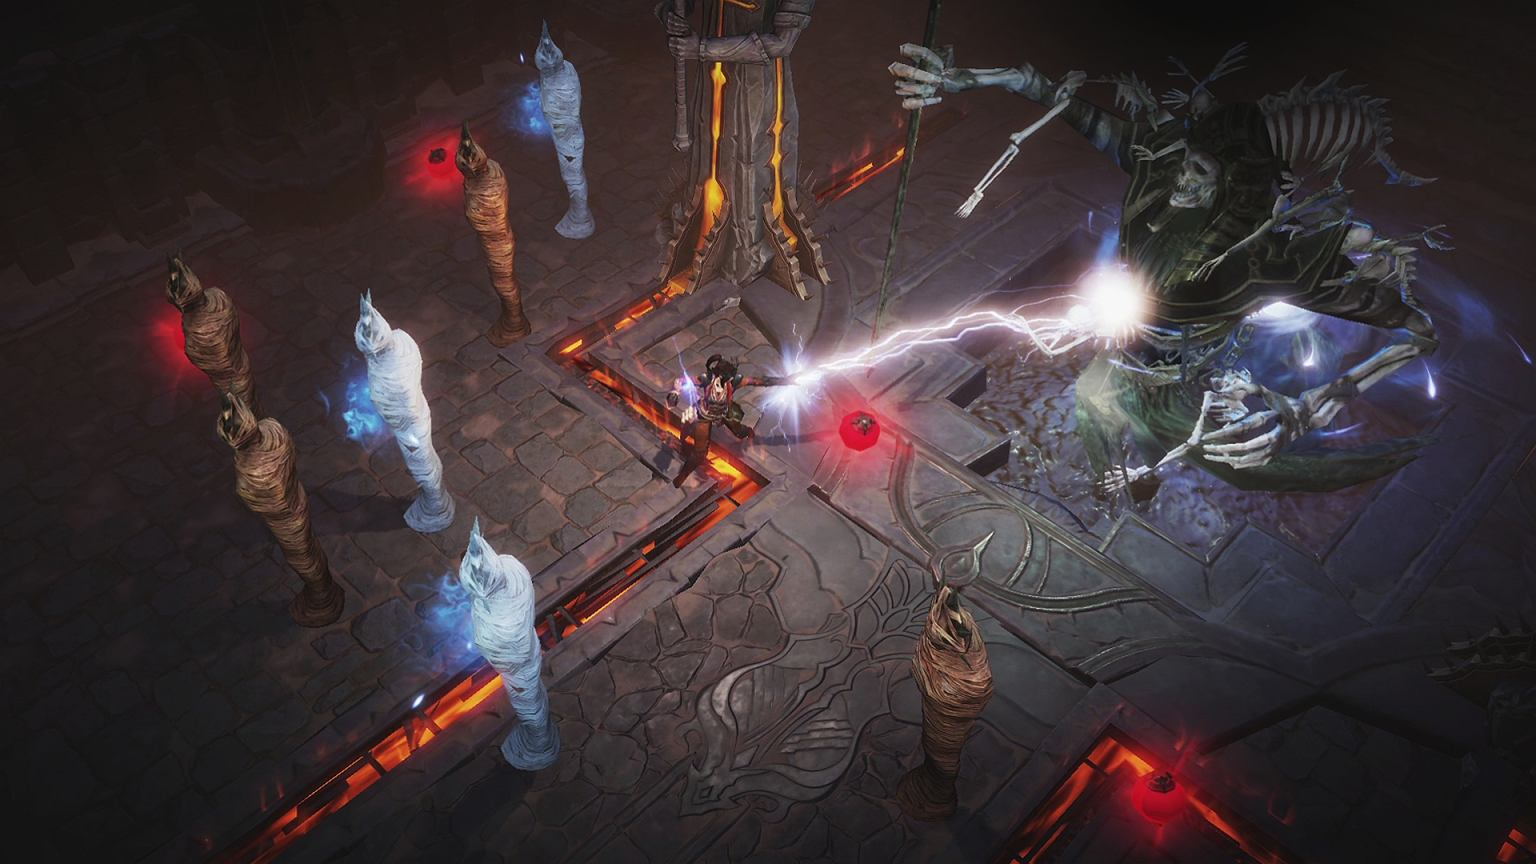 Diablo Immortal faces a backlash as Metacritic user score drops to  Blizzard's third lowest ever